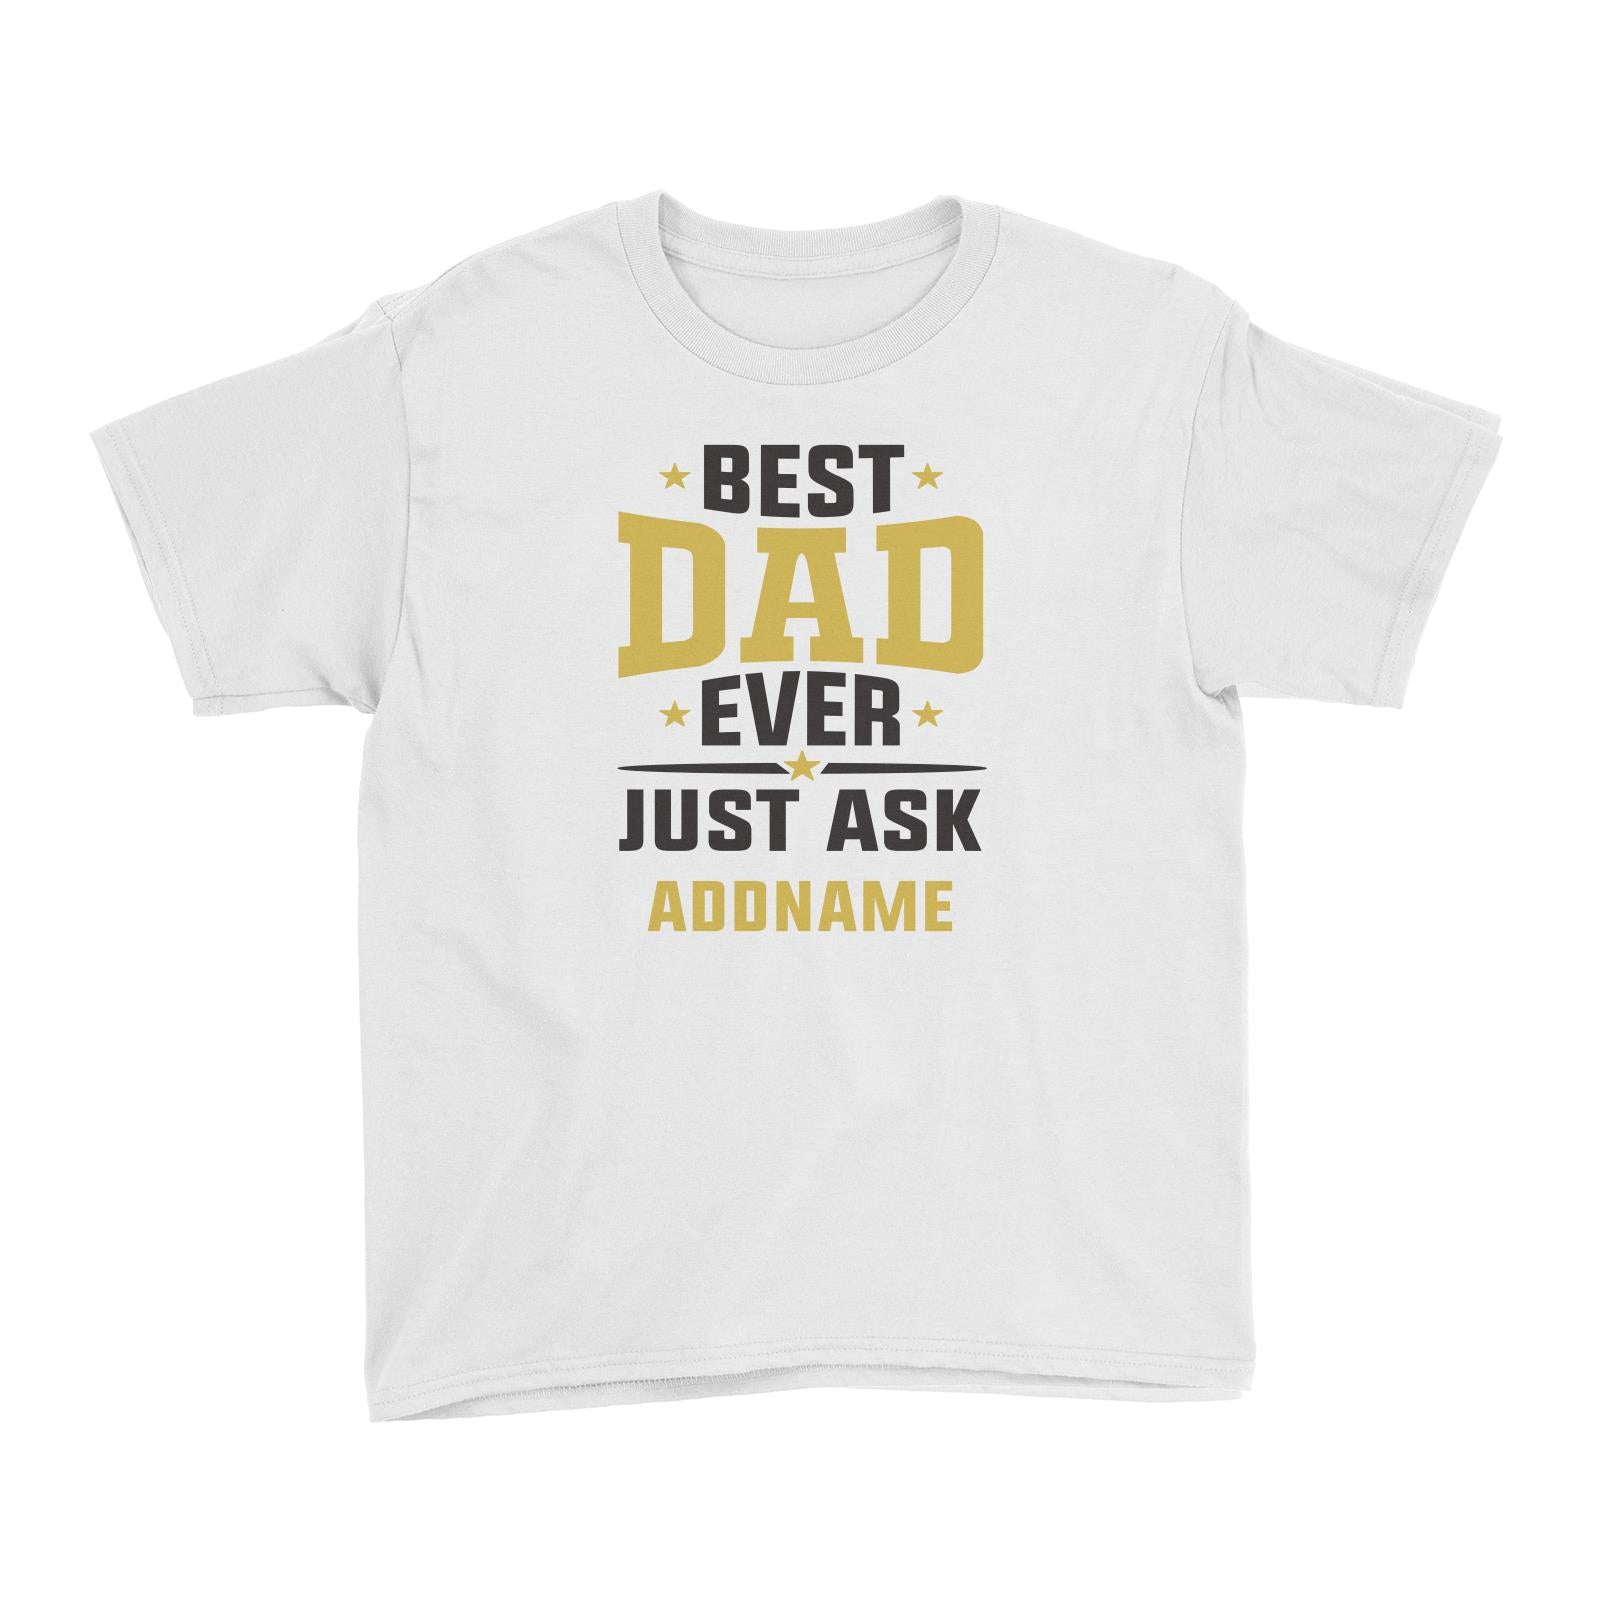 Best Dad Ever Just Ask Addname Kid's T-Shirt